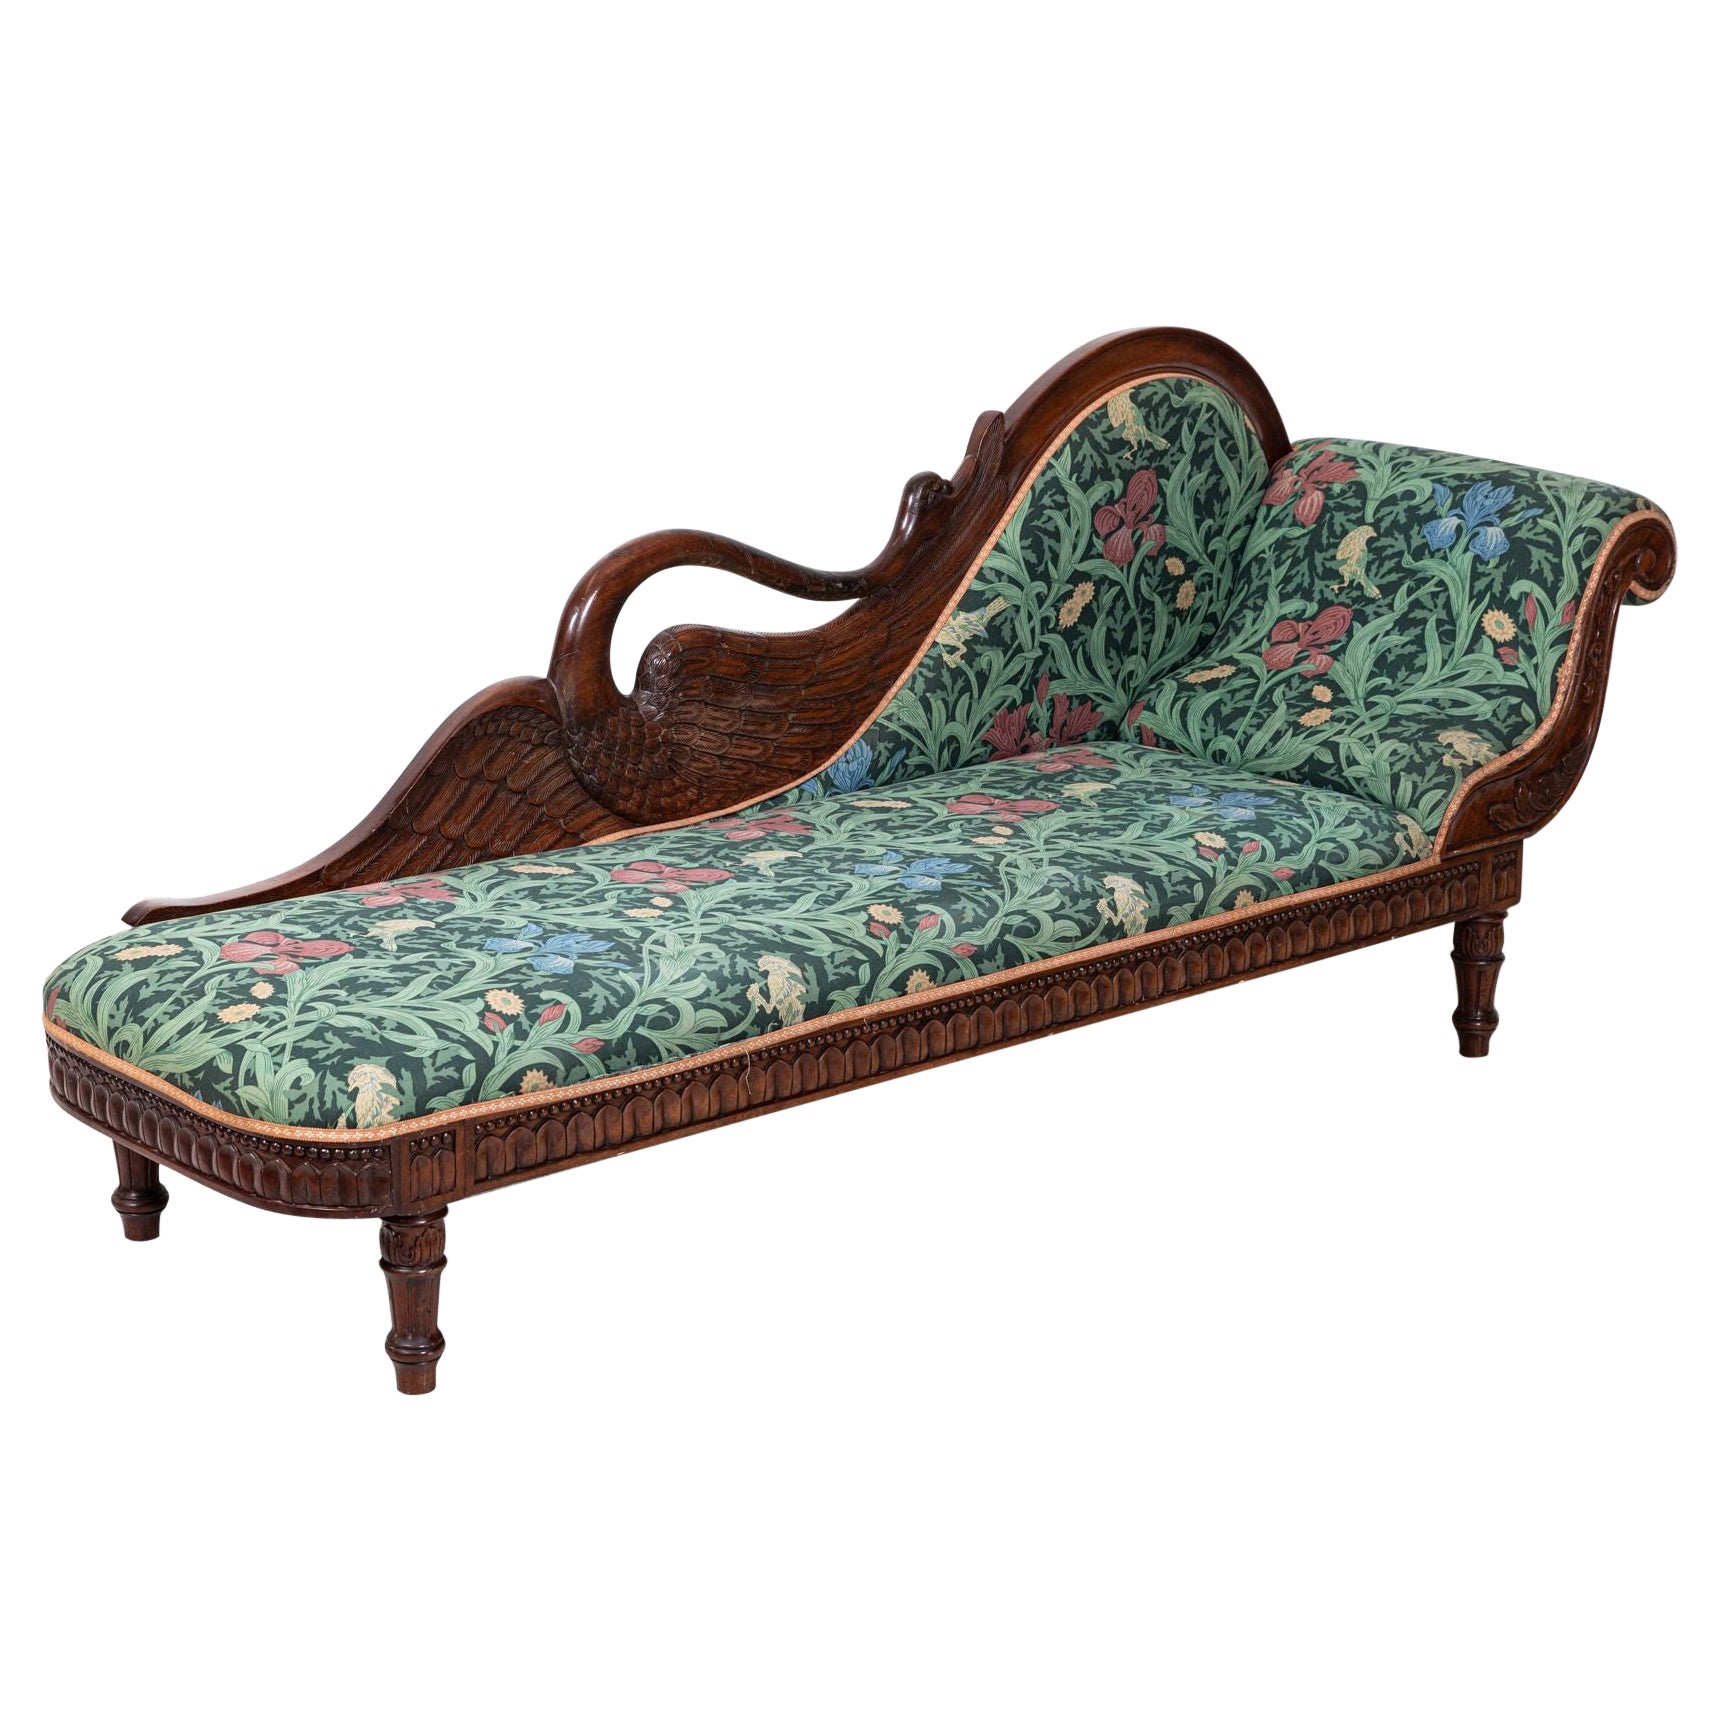 19thC French Empire Walnut Chaise Lounge / Daybed